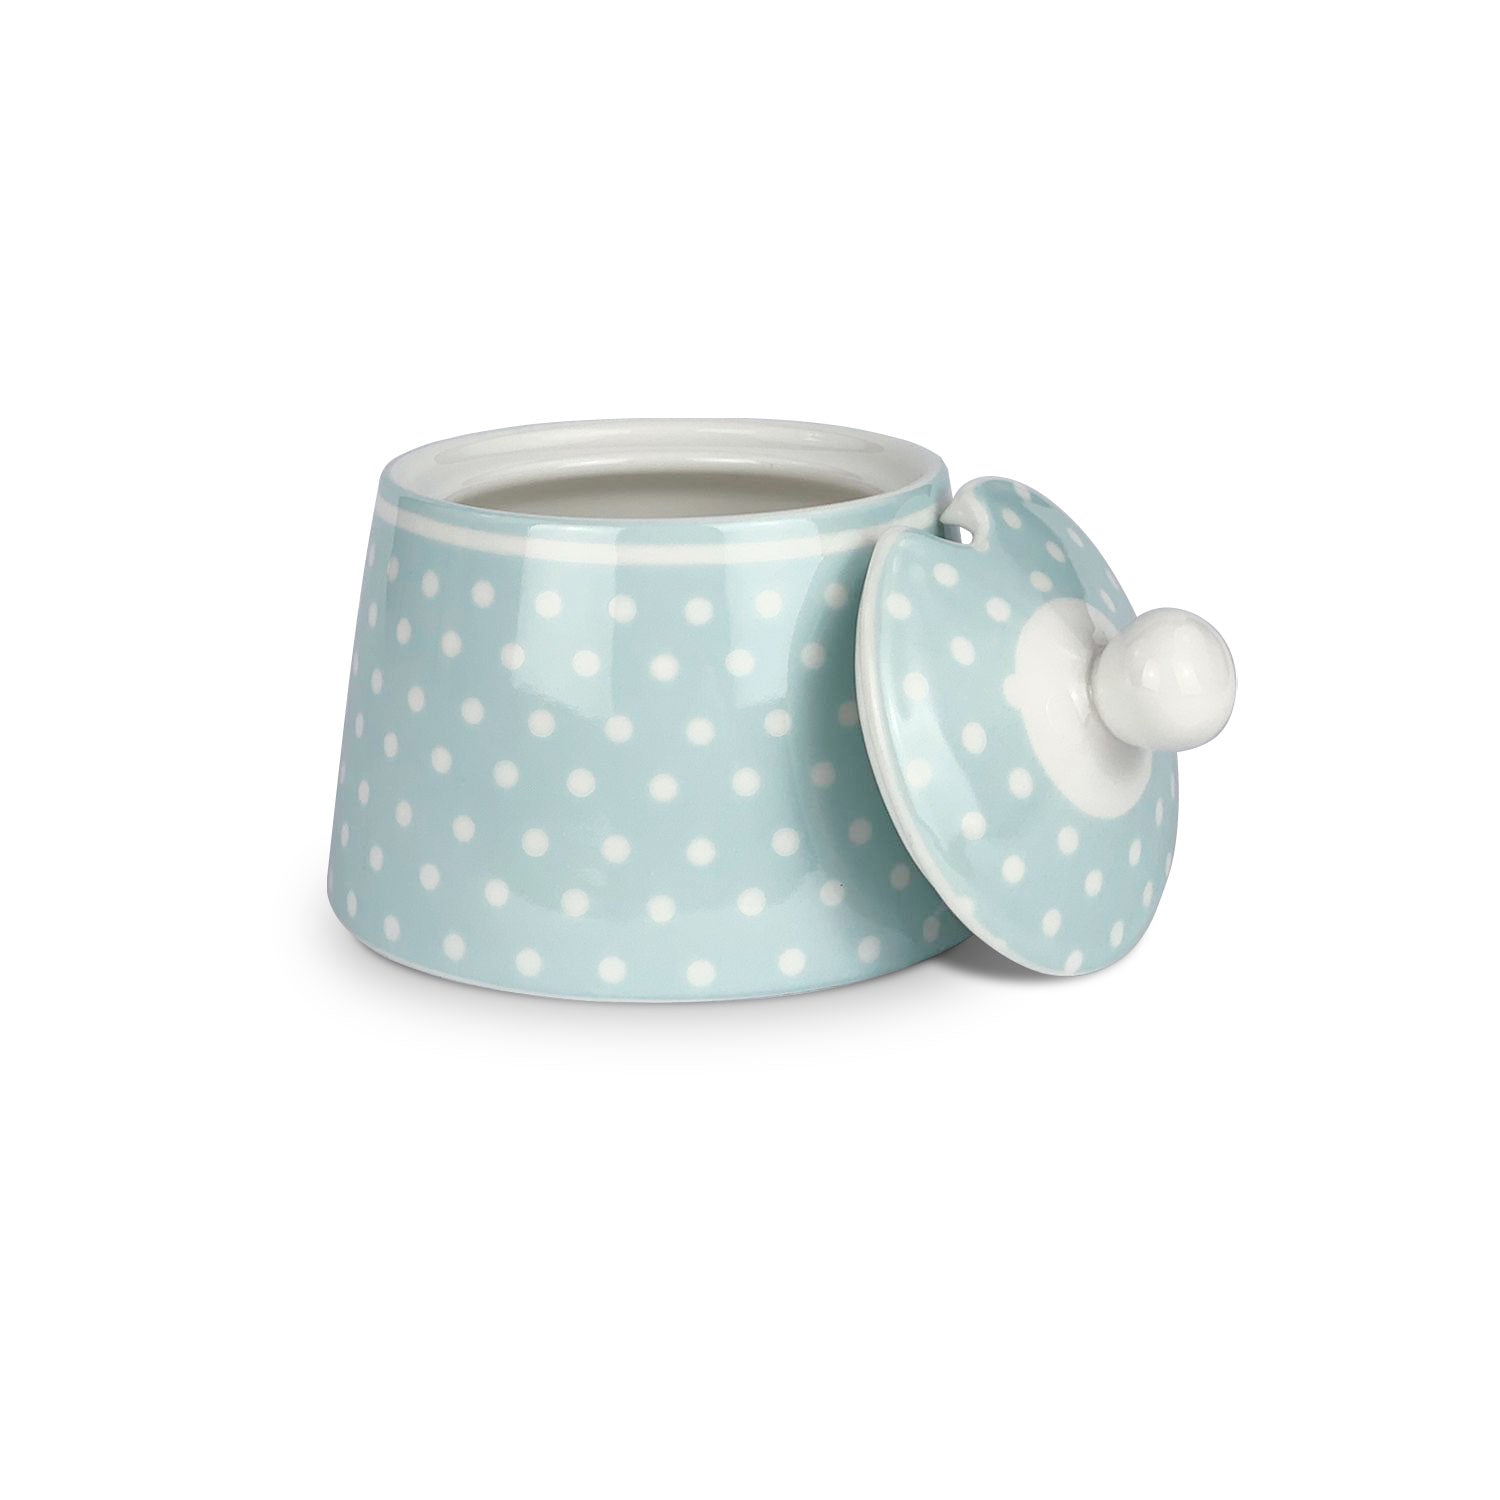 Zuccheriera in porcellana Isabelle Rose a pois Shabby chic rotonda 5068